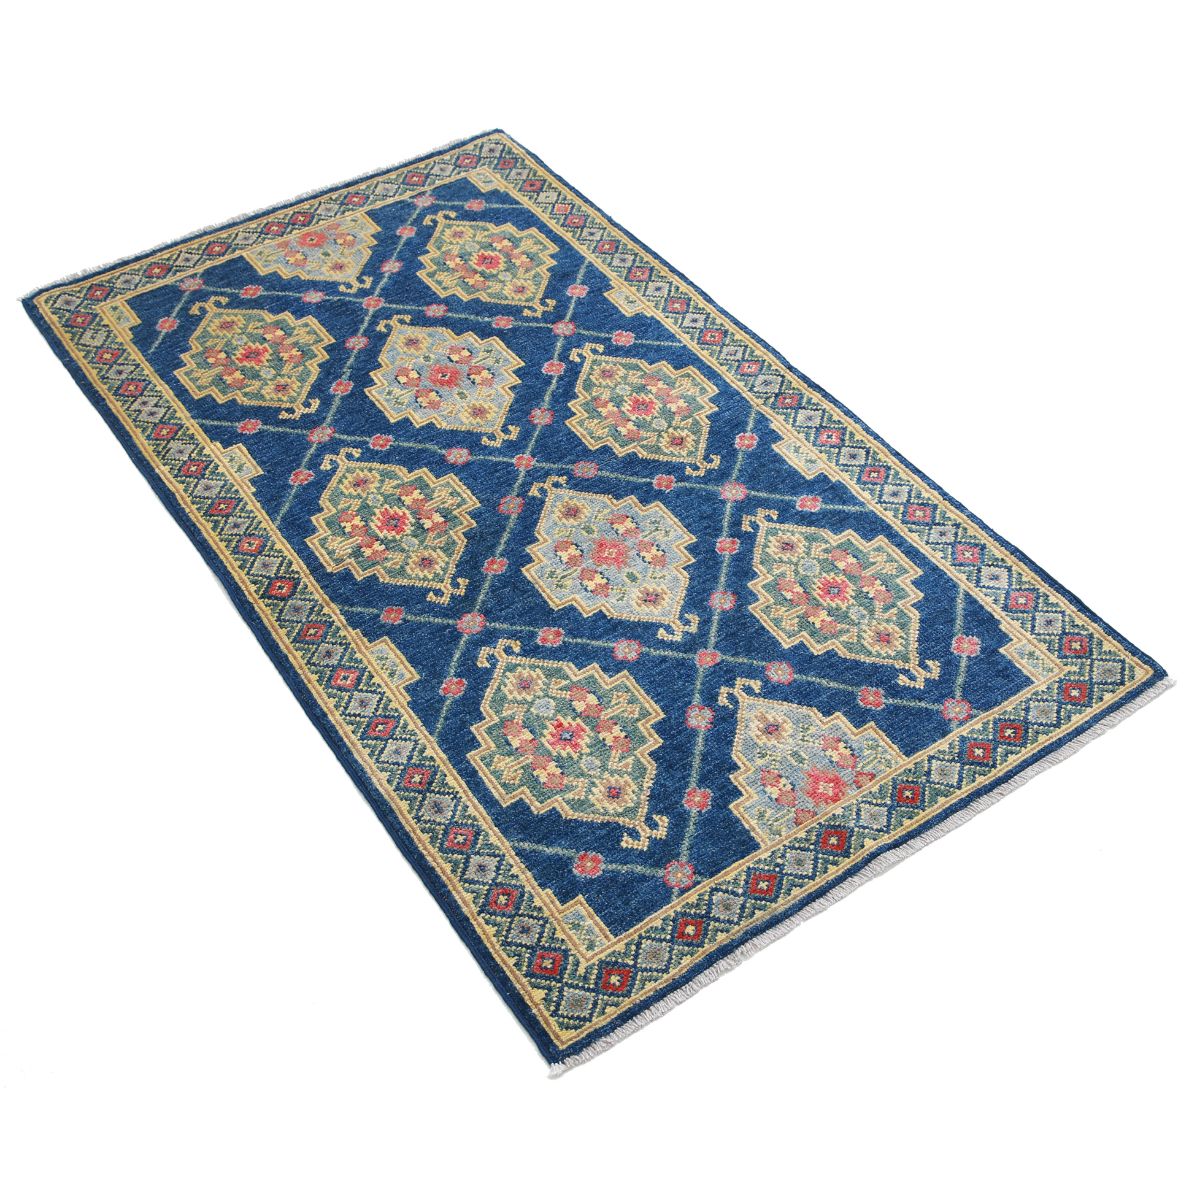 Revival 2' 8" X 4' 7" Wool Hand Knotted Rug